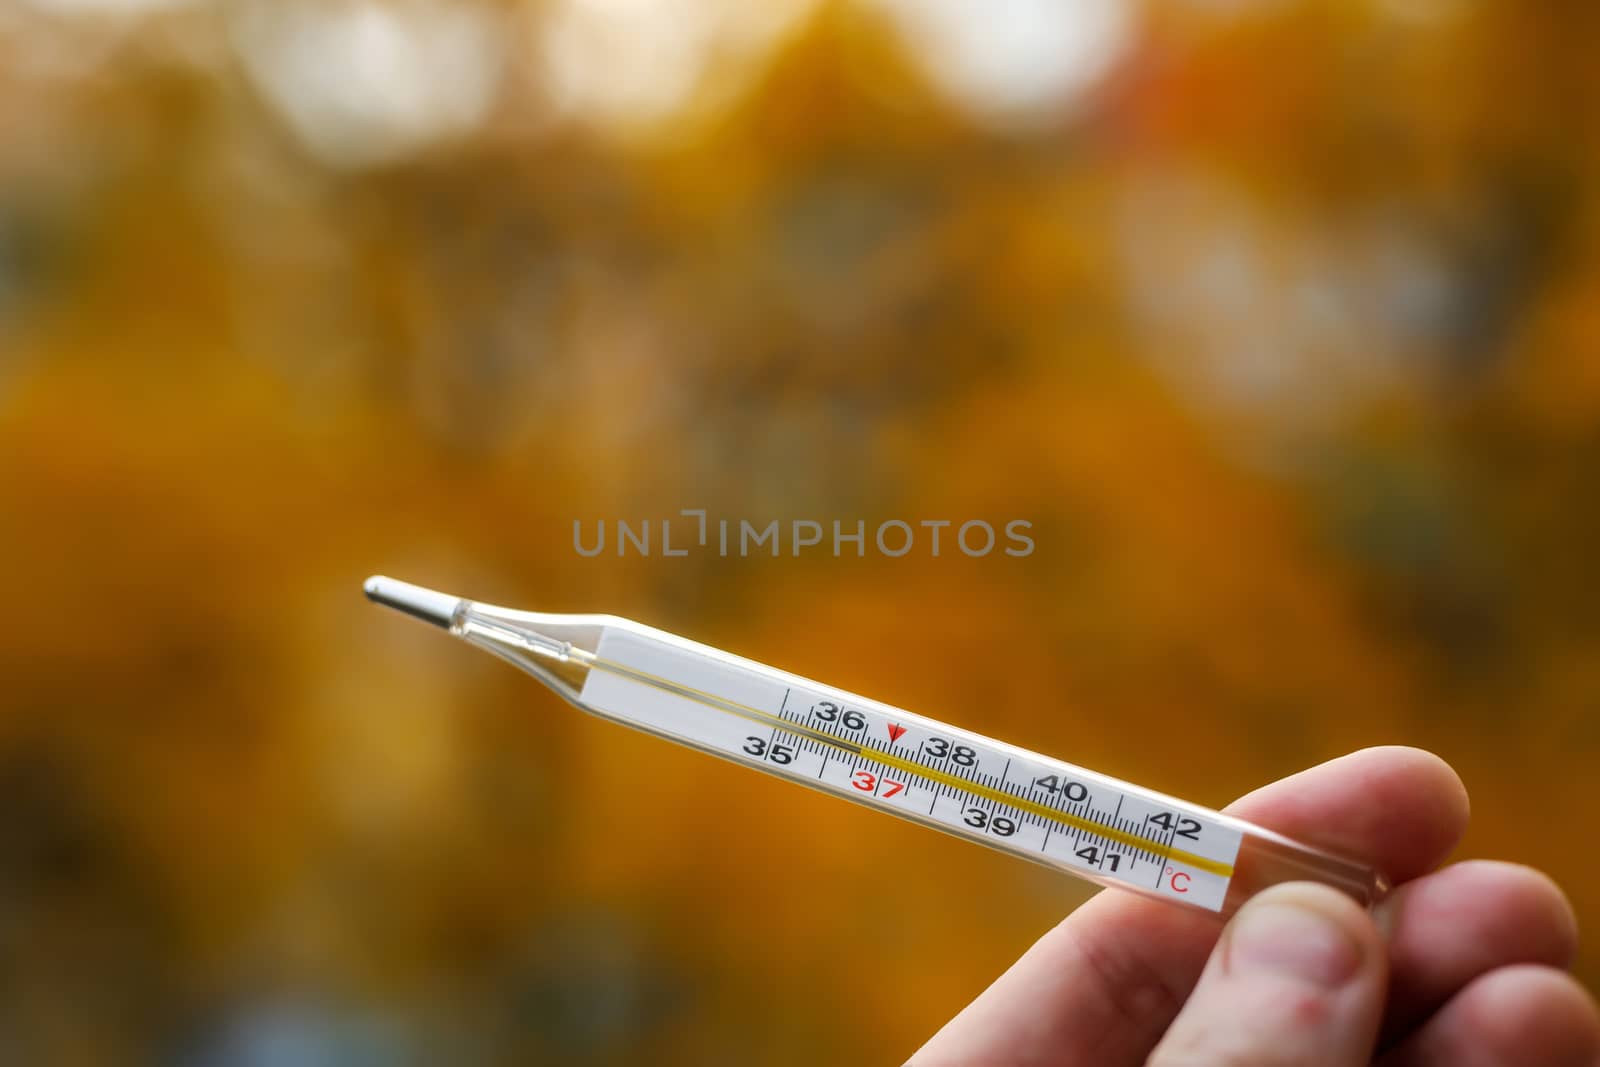 Hand with mercury thermometer on an autumn background. The normal temperature of a healthy person is 36.6.